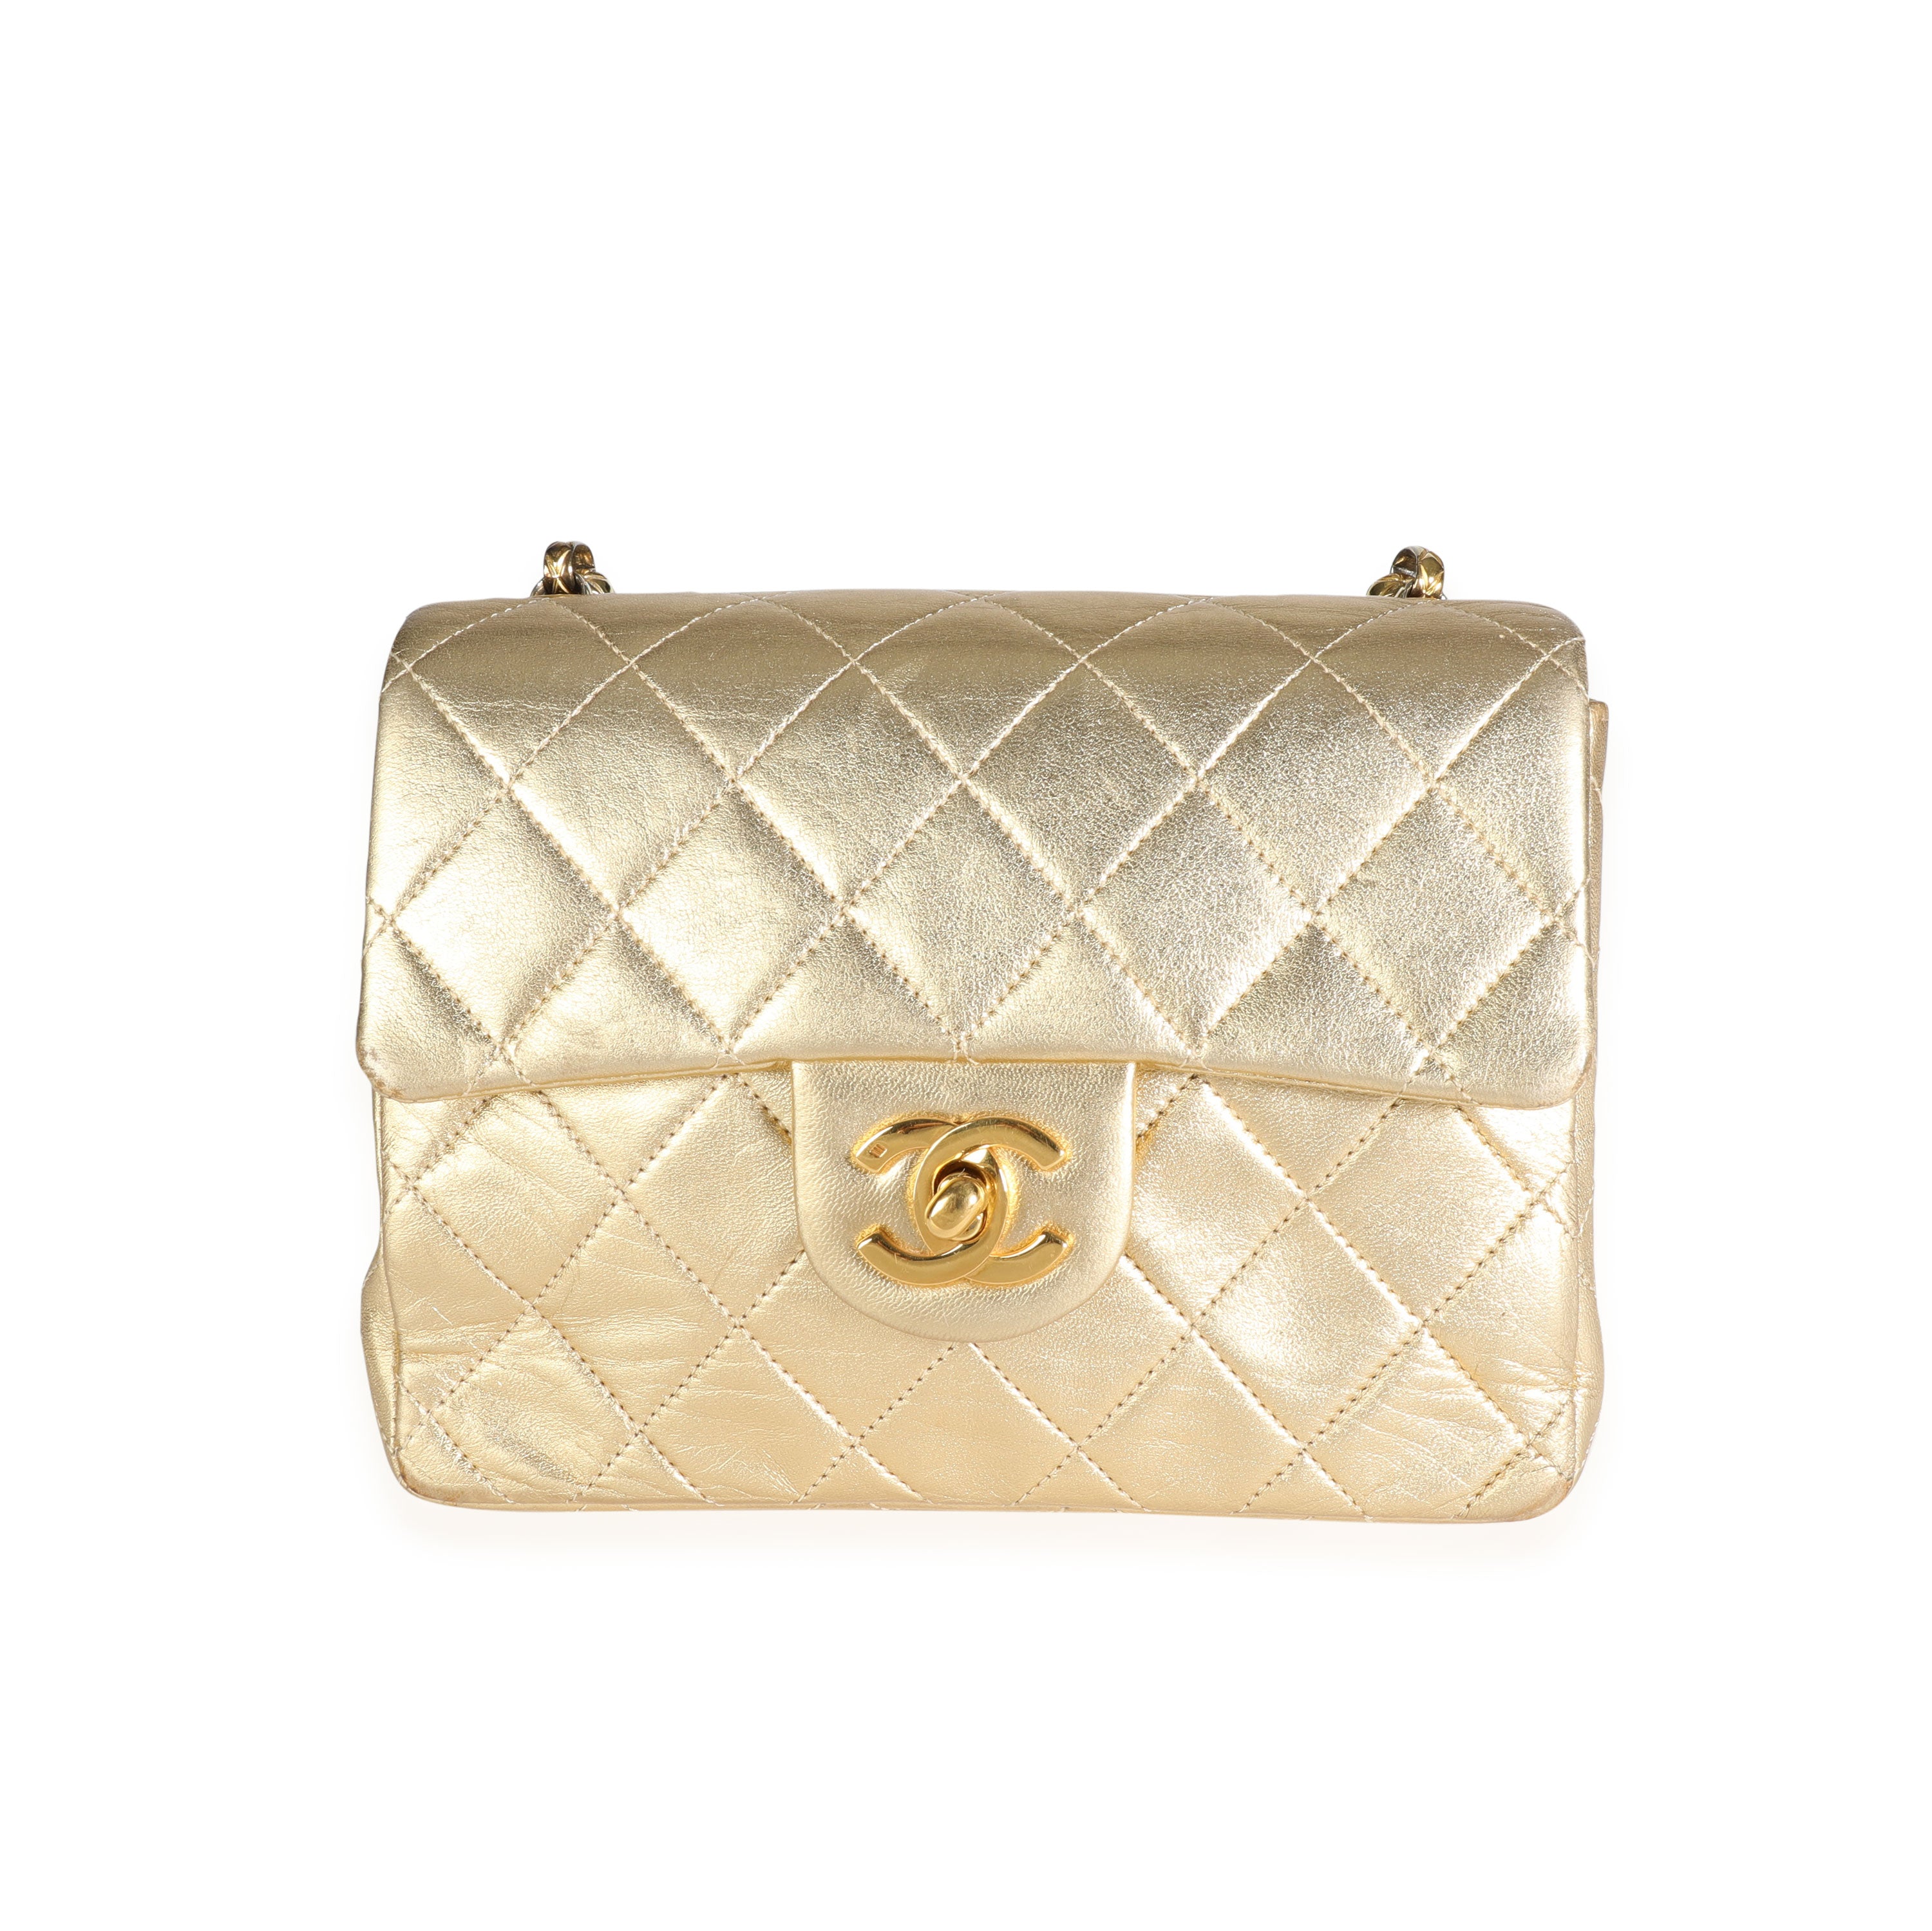 Chanel Gold Mini Quilted Lambskin Vintage Shoulder Bag at Jill's Consignment